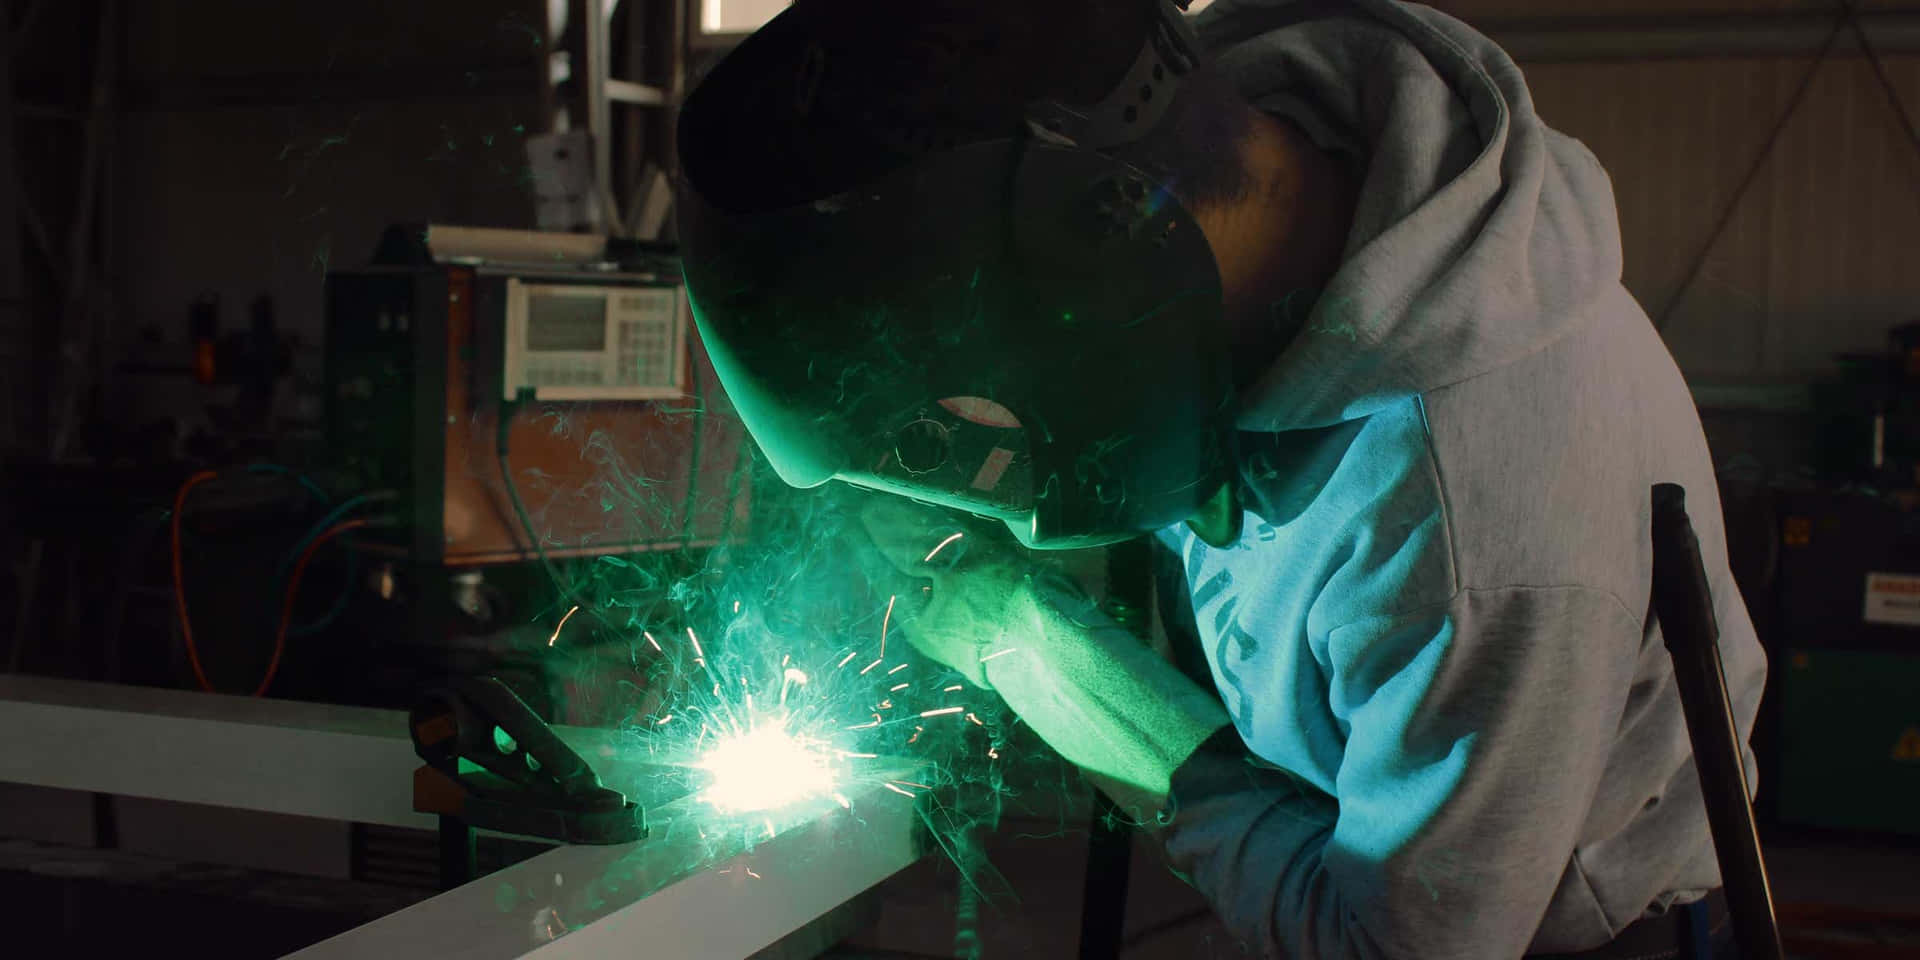 A Man Welding Metal In A Factory Background